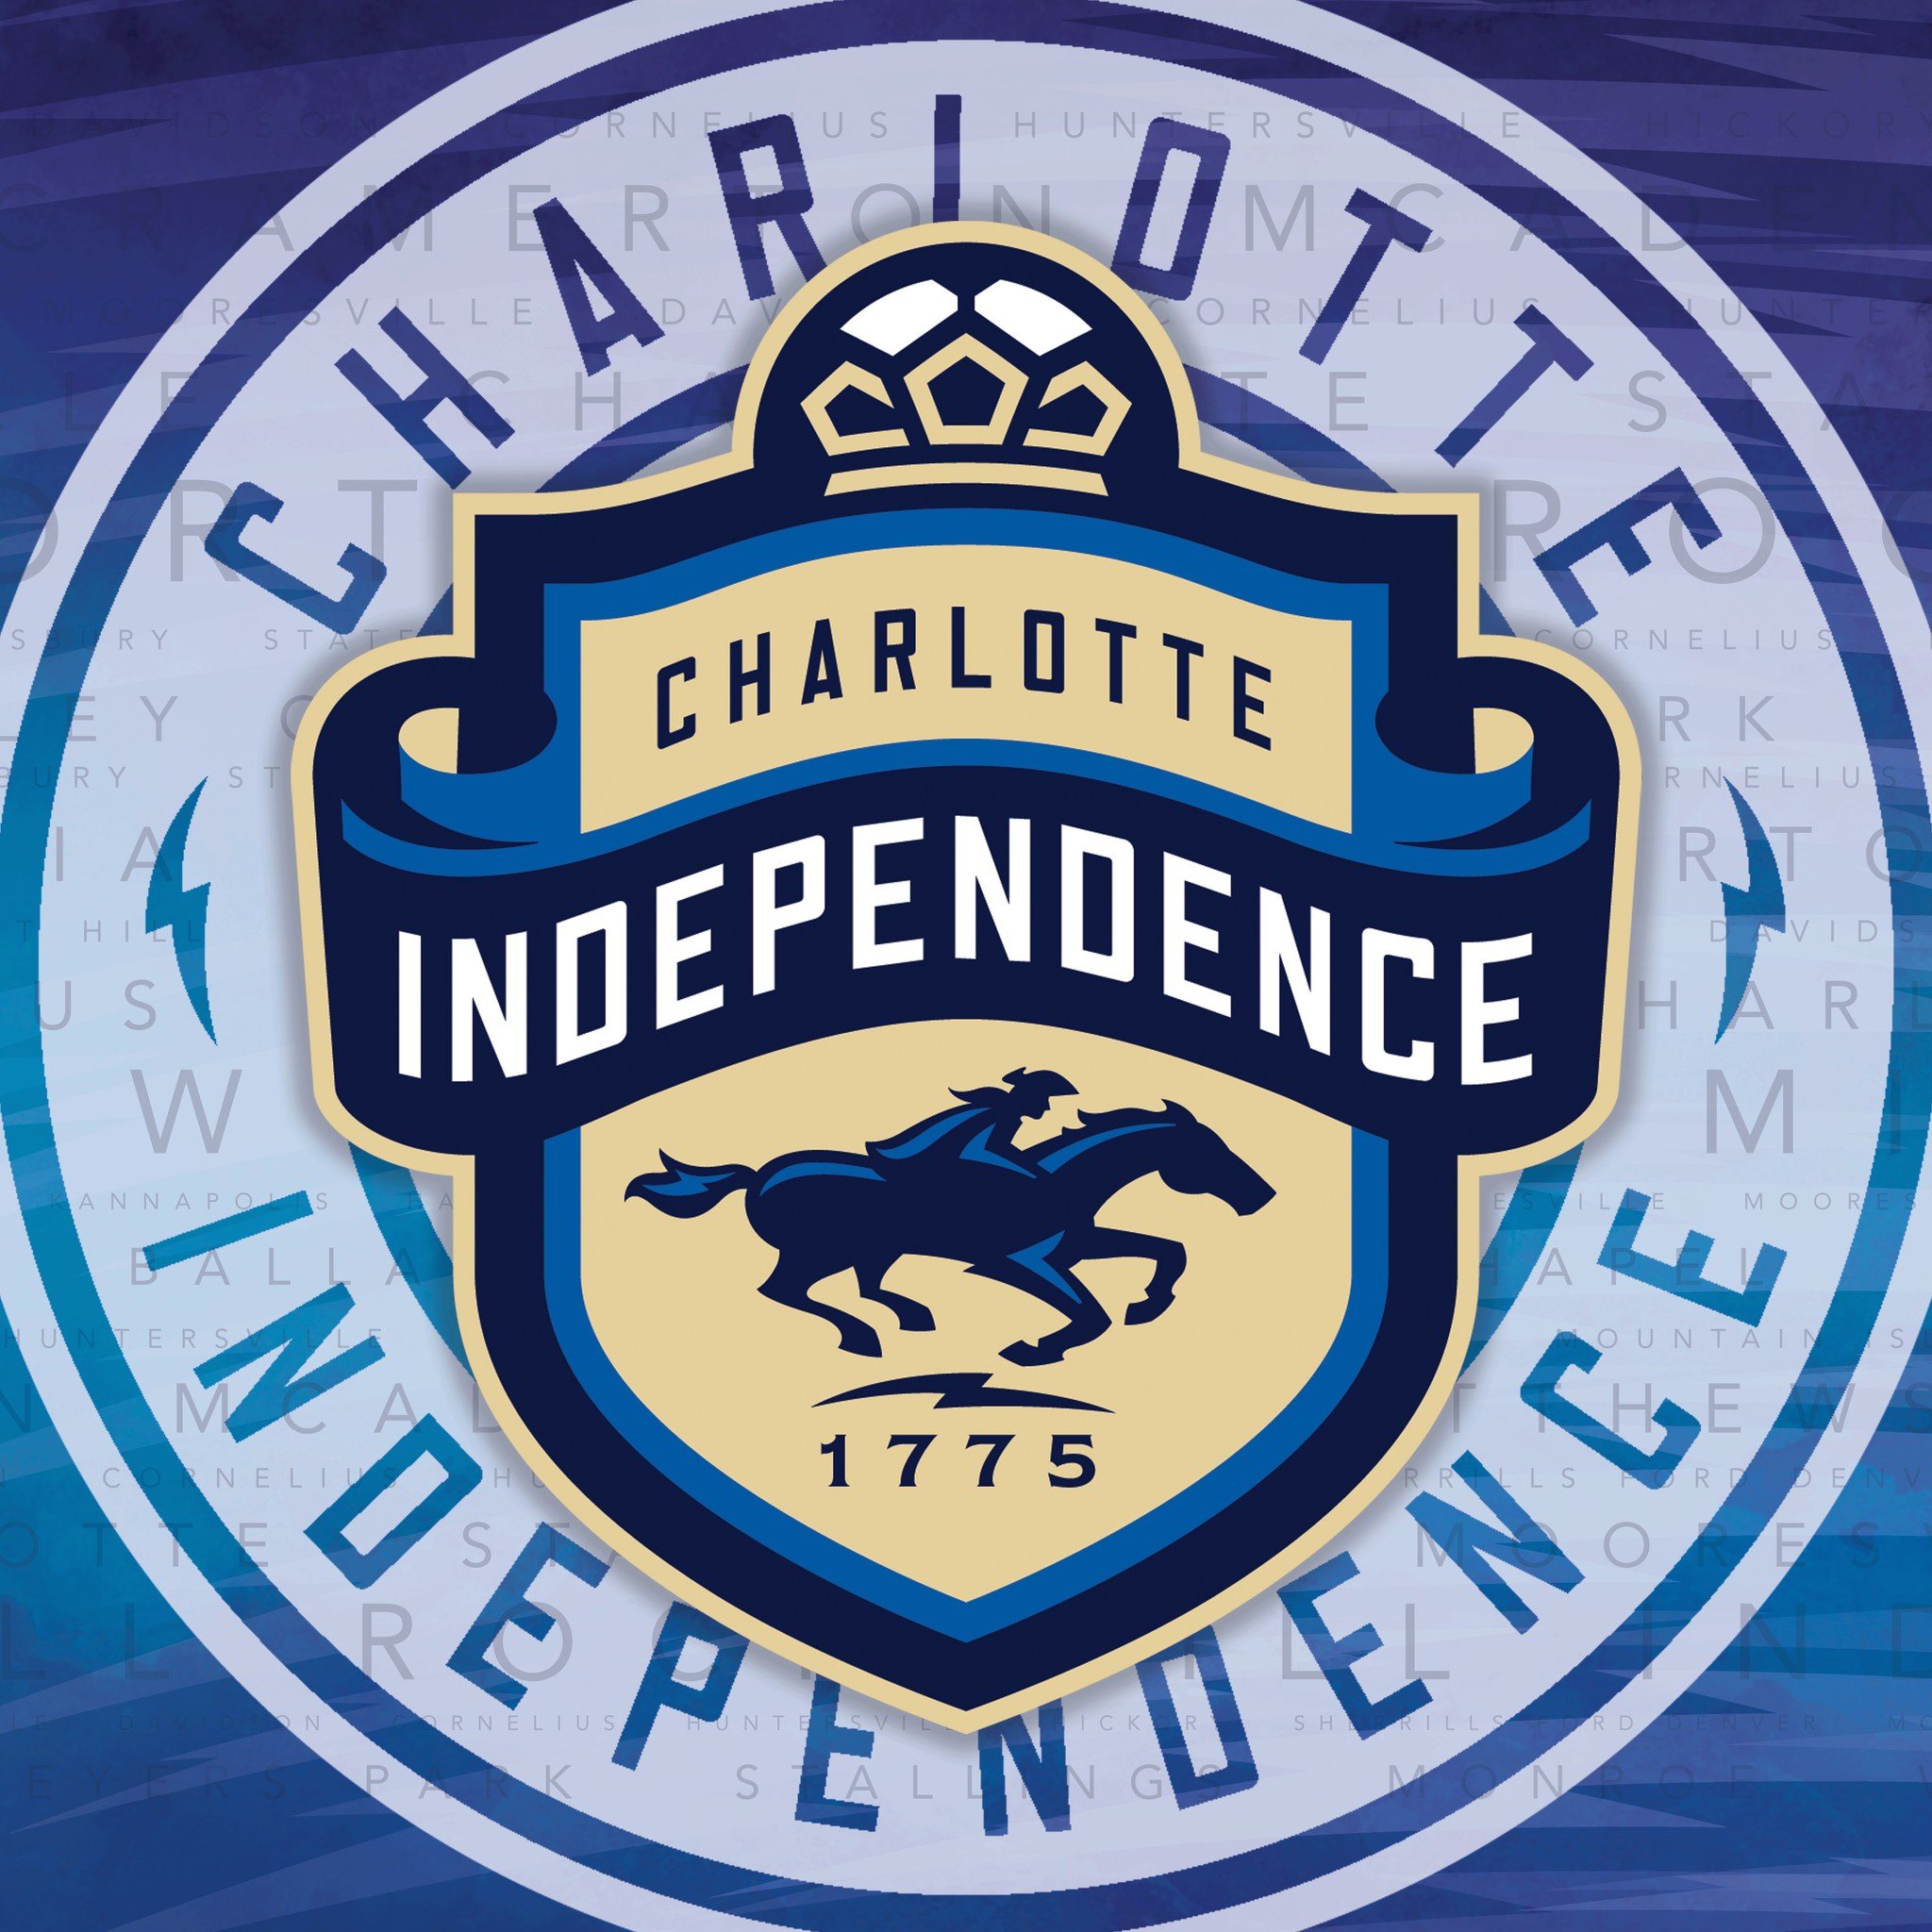 Charlotte Independence Soccer Club | Organizational Profile, Work & Jobs